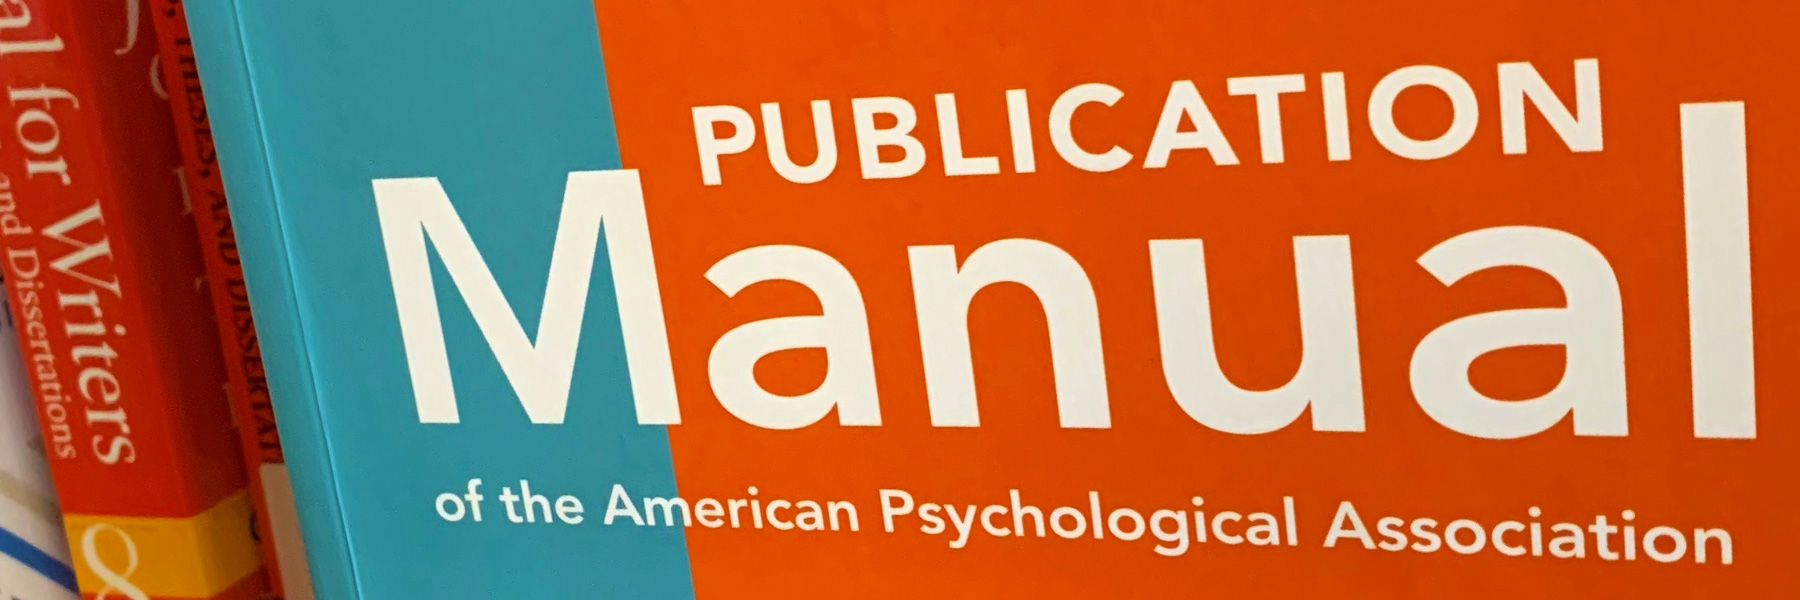 APA Manual 7th | Searching and Referencing Course | Dr Steven A Martin | Source APA (2020)